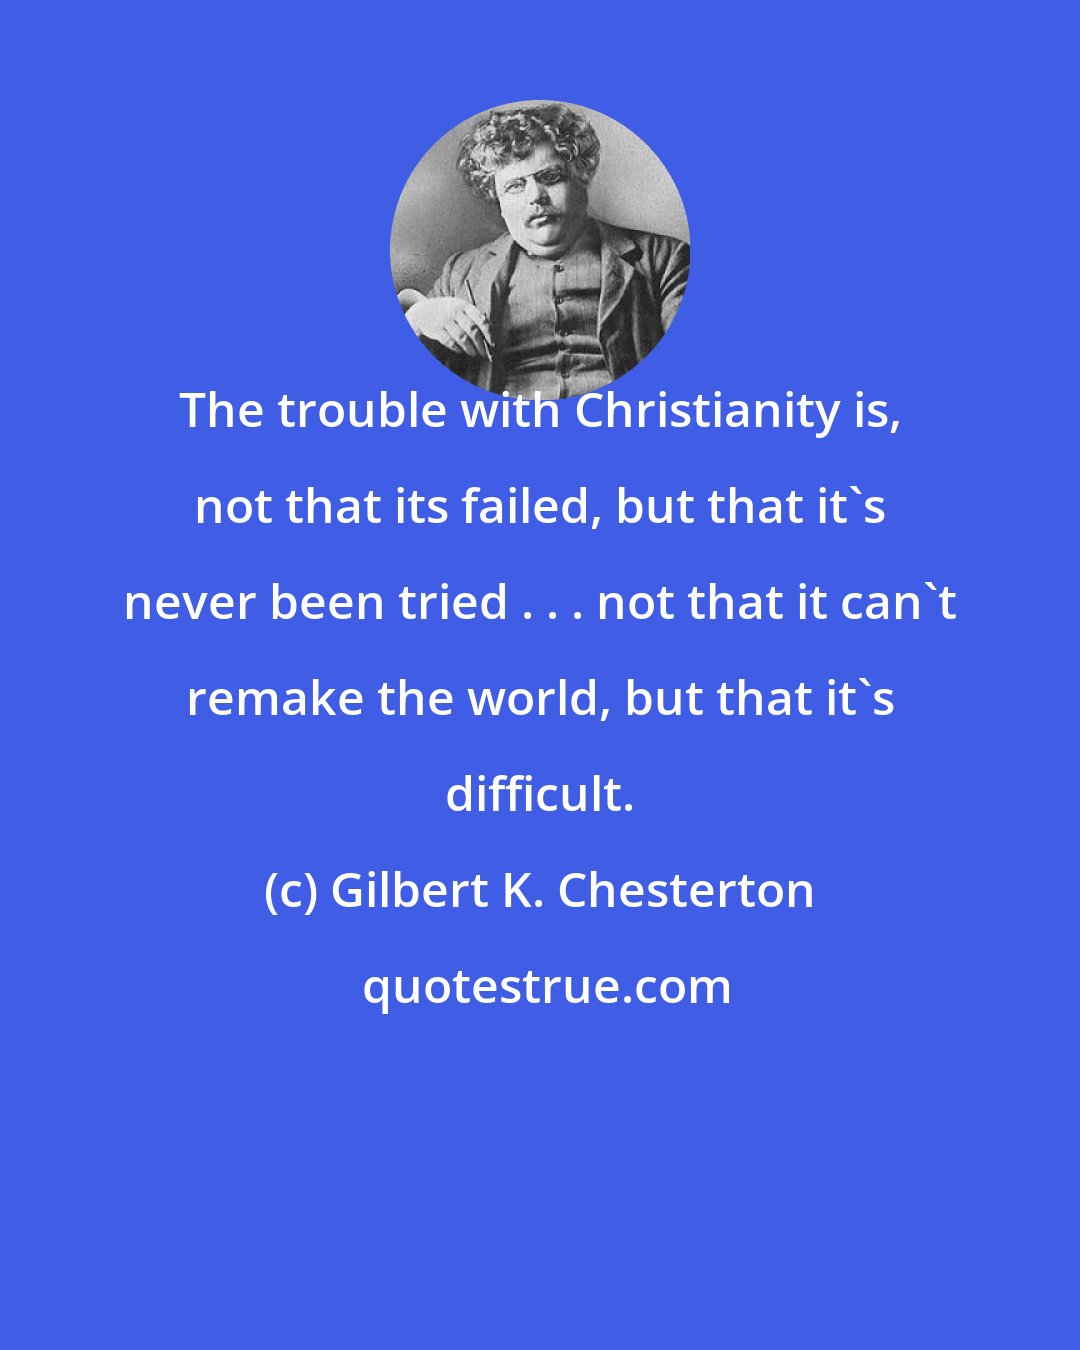 Gilbert K. Chesterton: The trouble with Christianity is, not that its failed, but that it's never been tried . . . not that it can't remake the world, but that it's difficult.